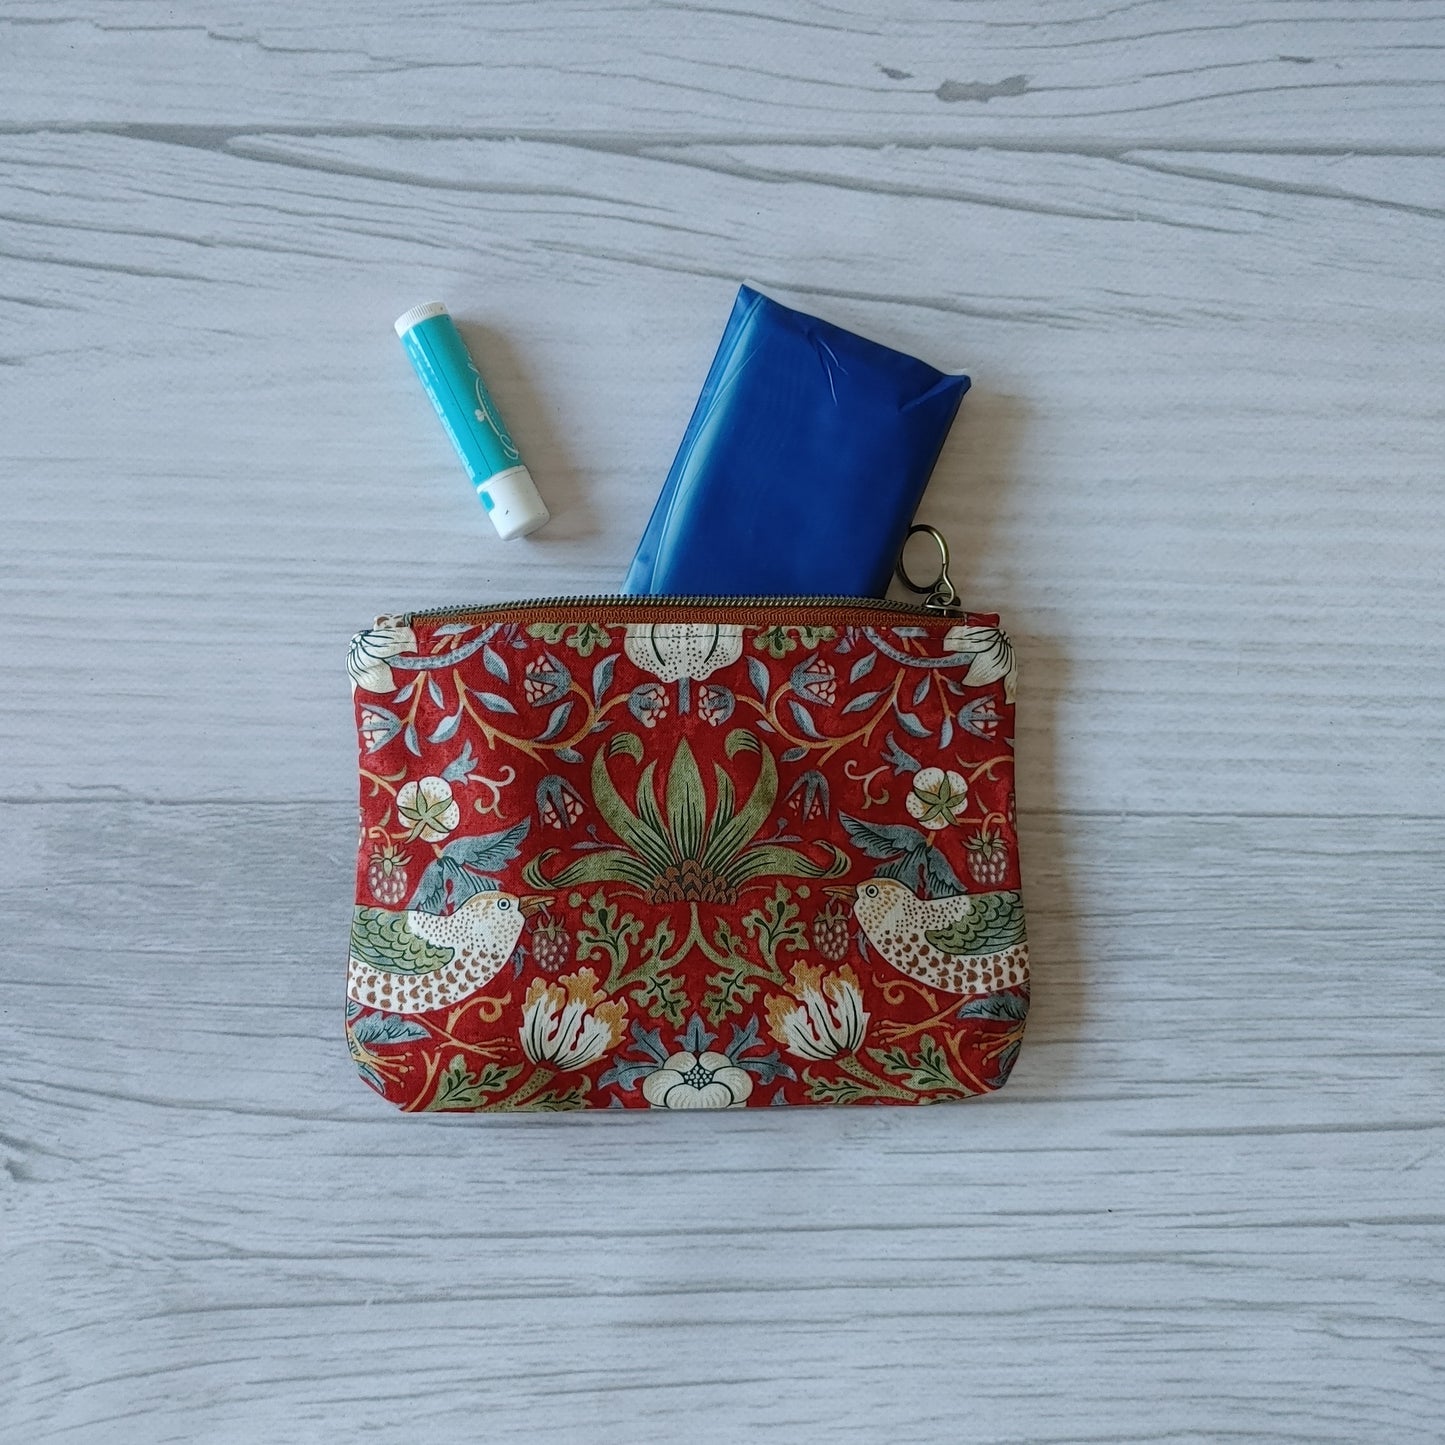 Passport Pouch in Strawberry Thief by William Morris print. From Plumage Studio Accessories